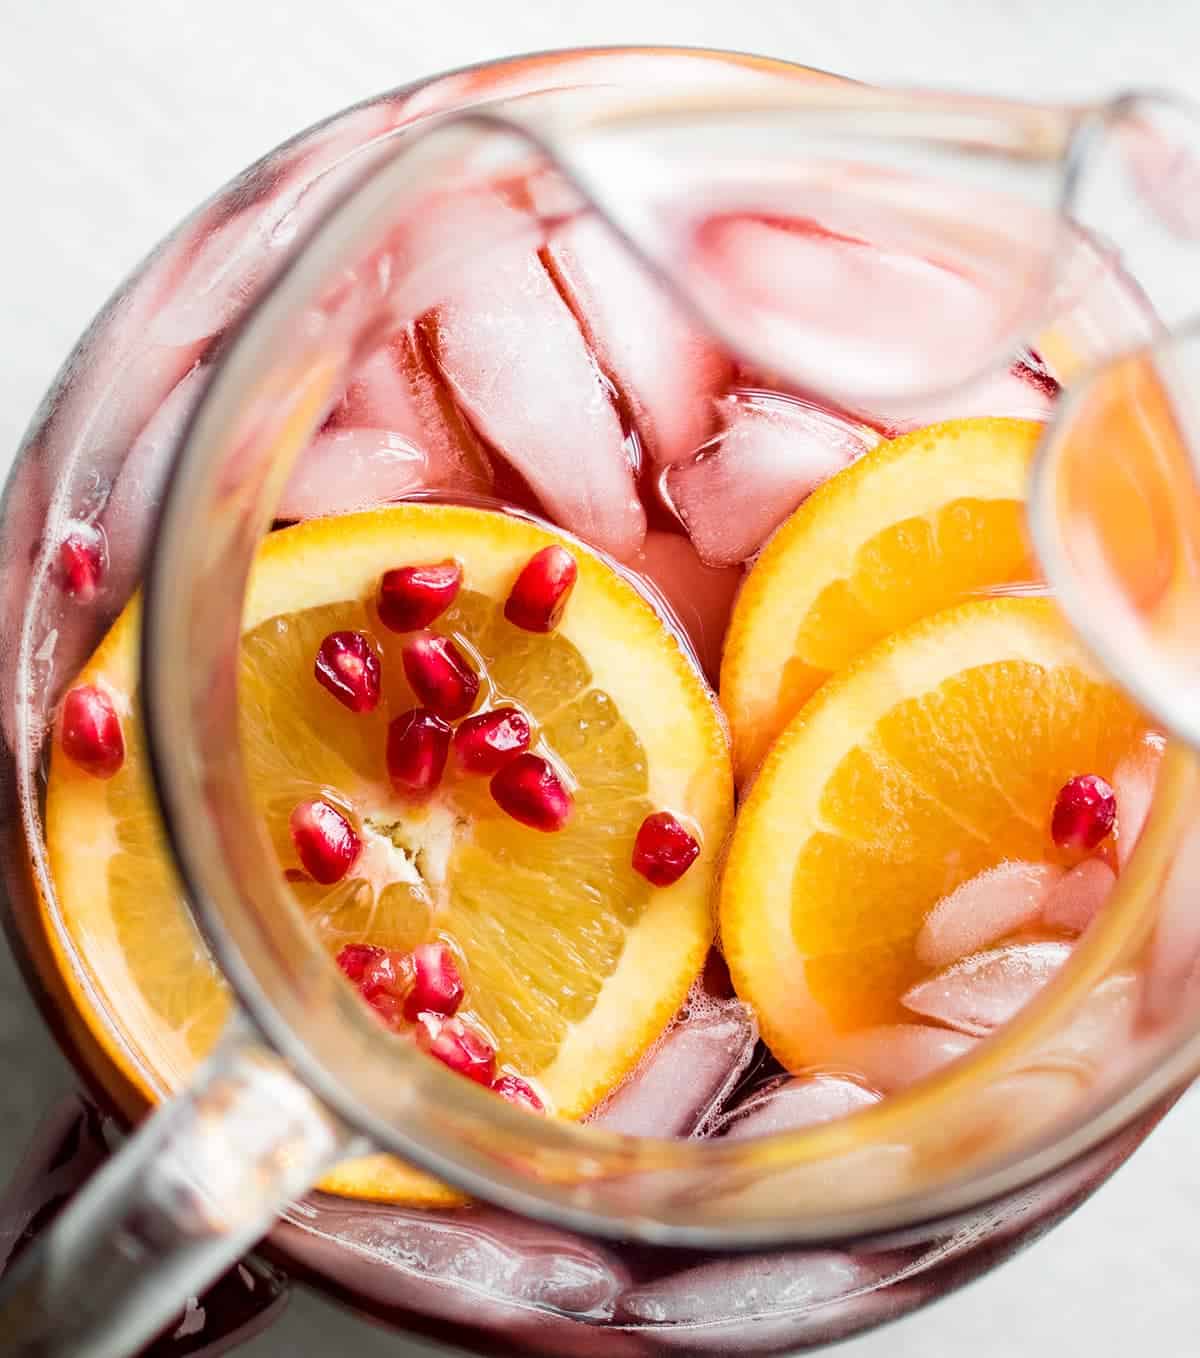 Top down view into glass pitcher filled with red drink, orange slices, and pomegranate seeds.